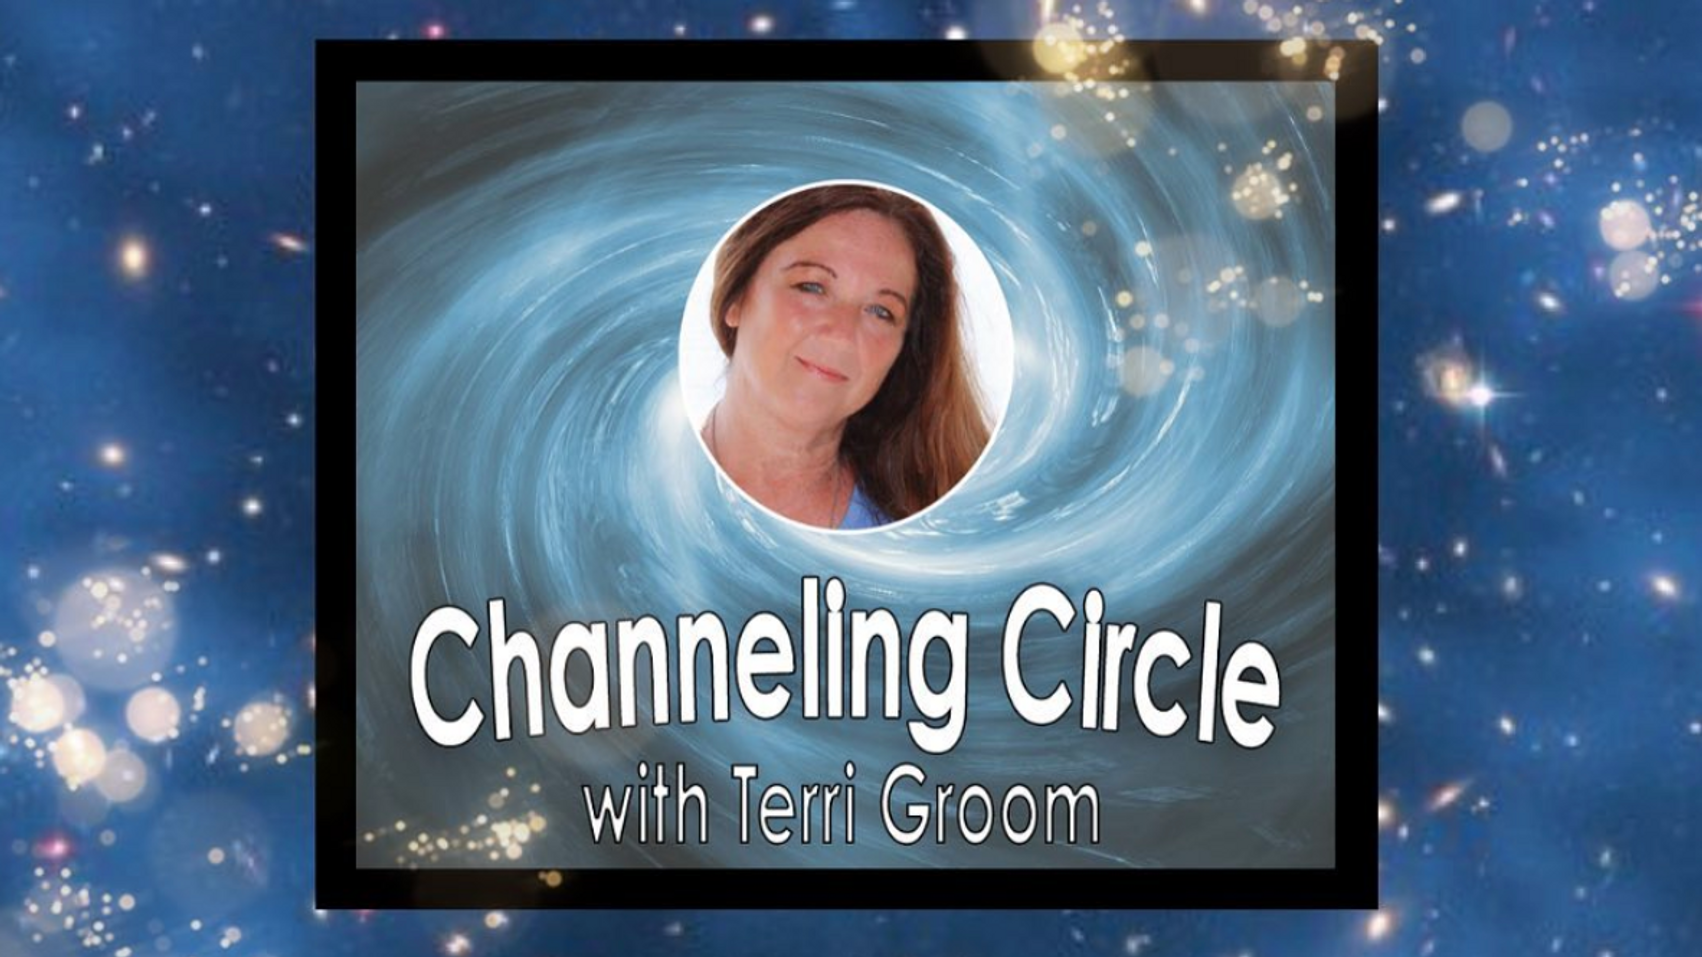 Channeling with Terri Groom